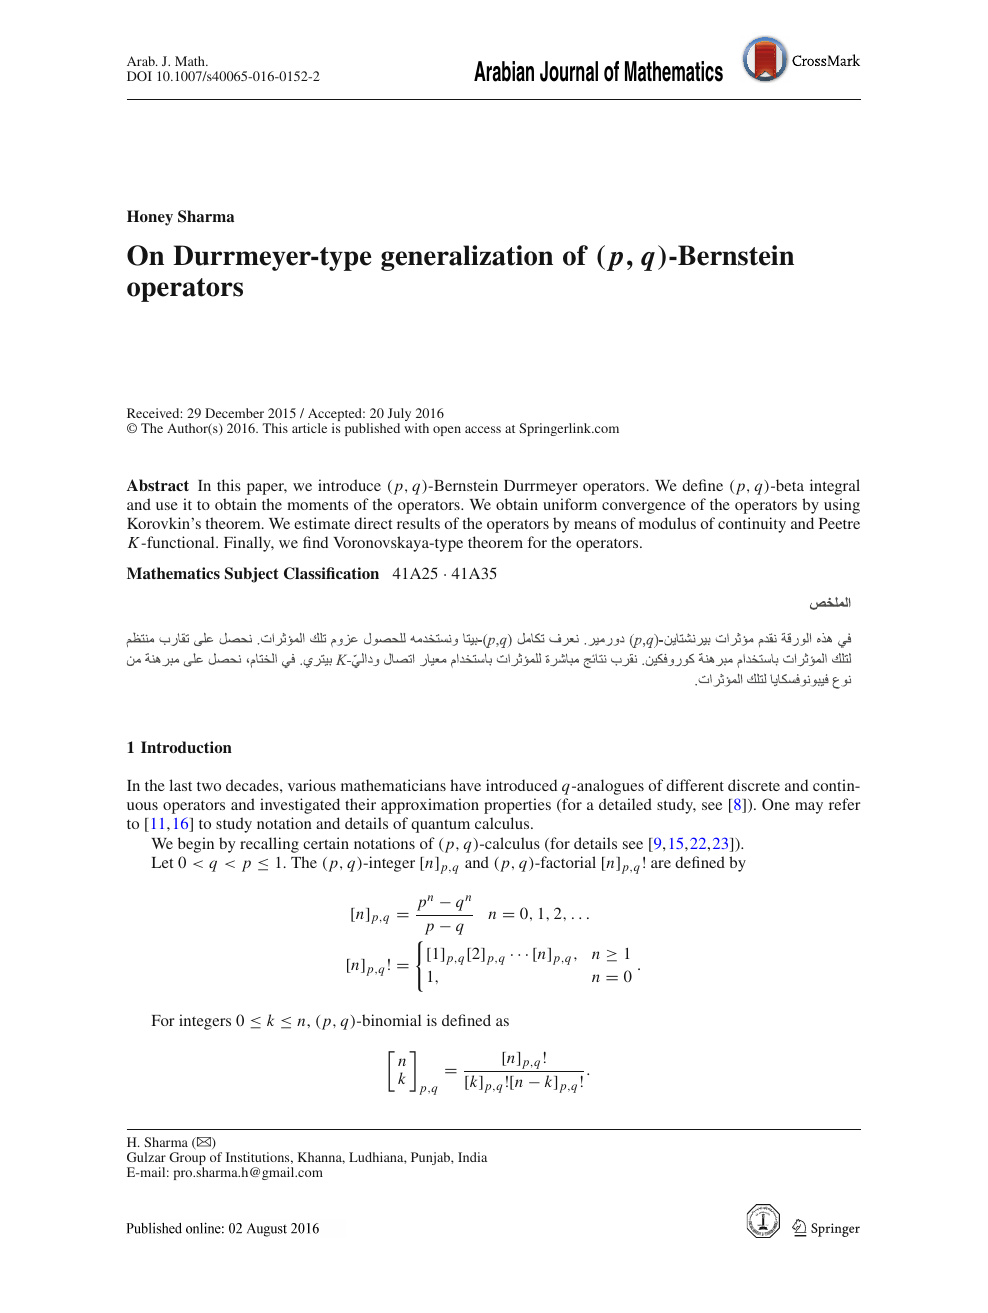 On Durrmeyer Type Generalization Of P Q Bernstein Operators Topic Of Research Paper In Mathematics Download Scholarly Article Pdf And Read For Free On Cyberleninka Open Science Hub